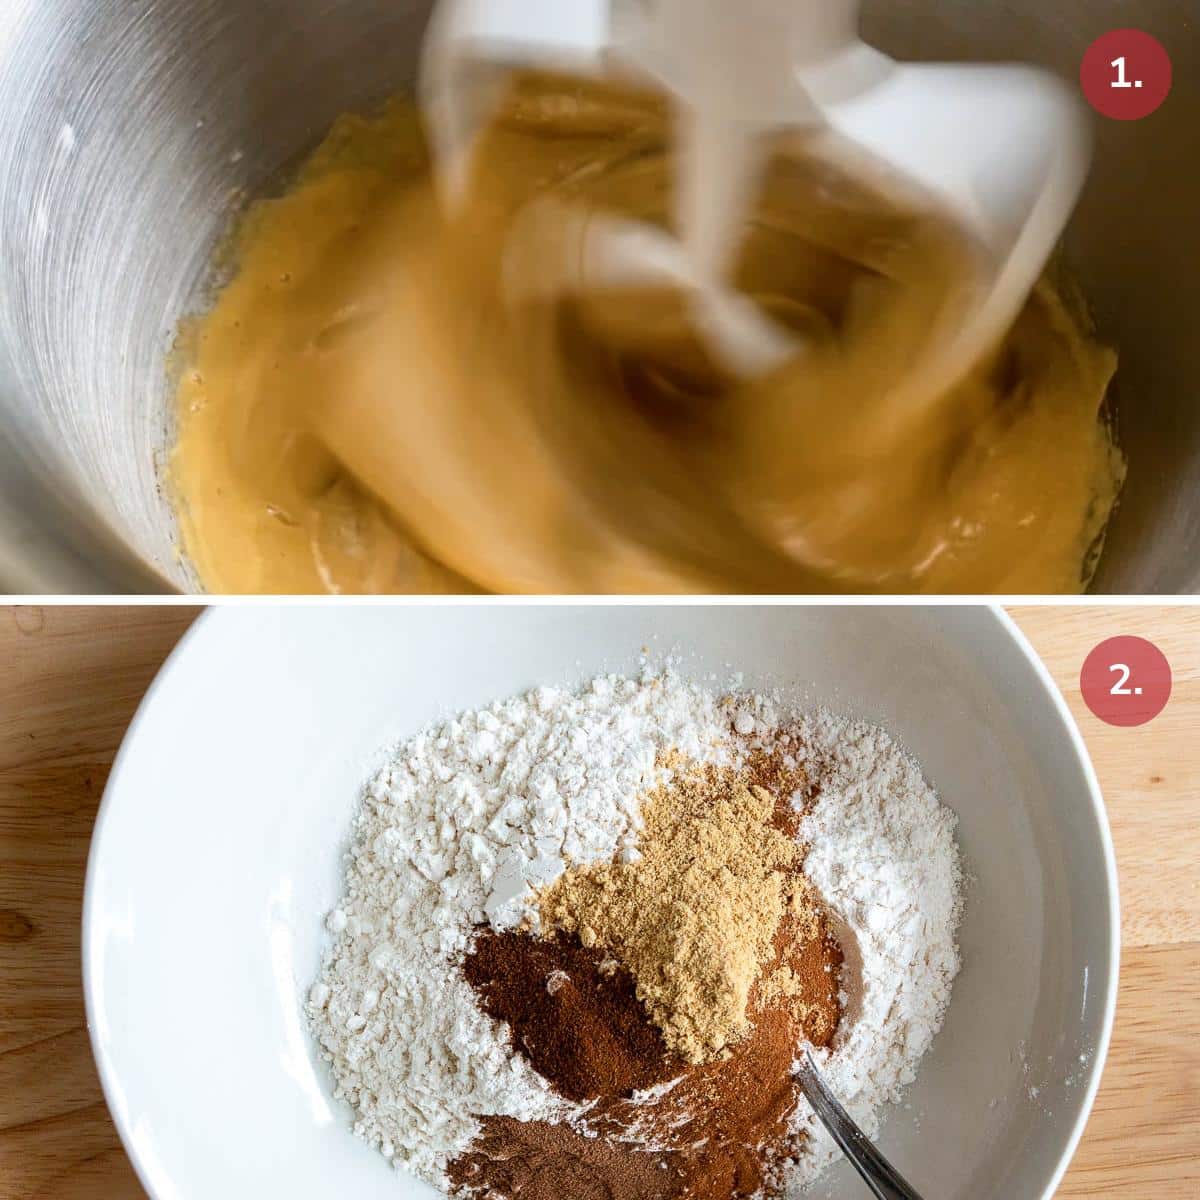 Whipping eggs and brown sugar until light and creamy and in a separate bowl combing the dry ingredients to make gingerbread.